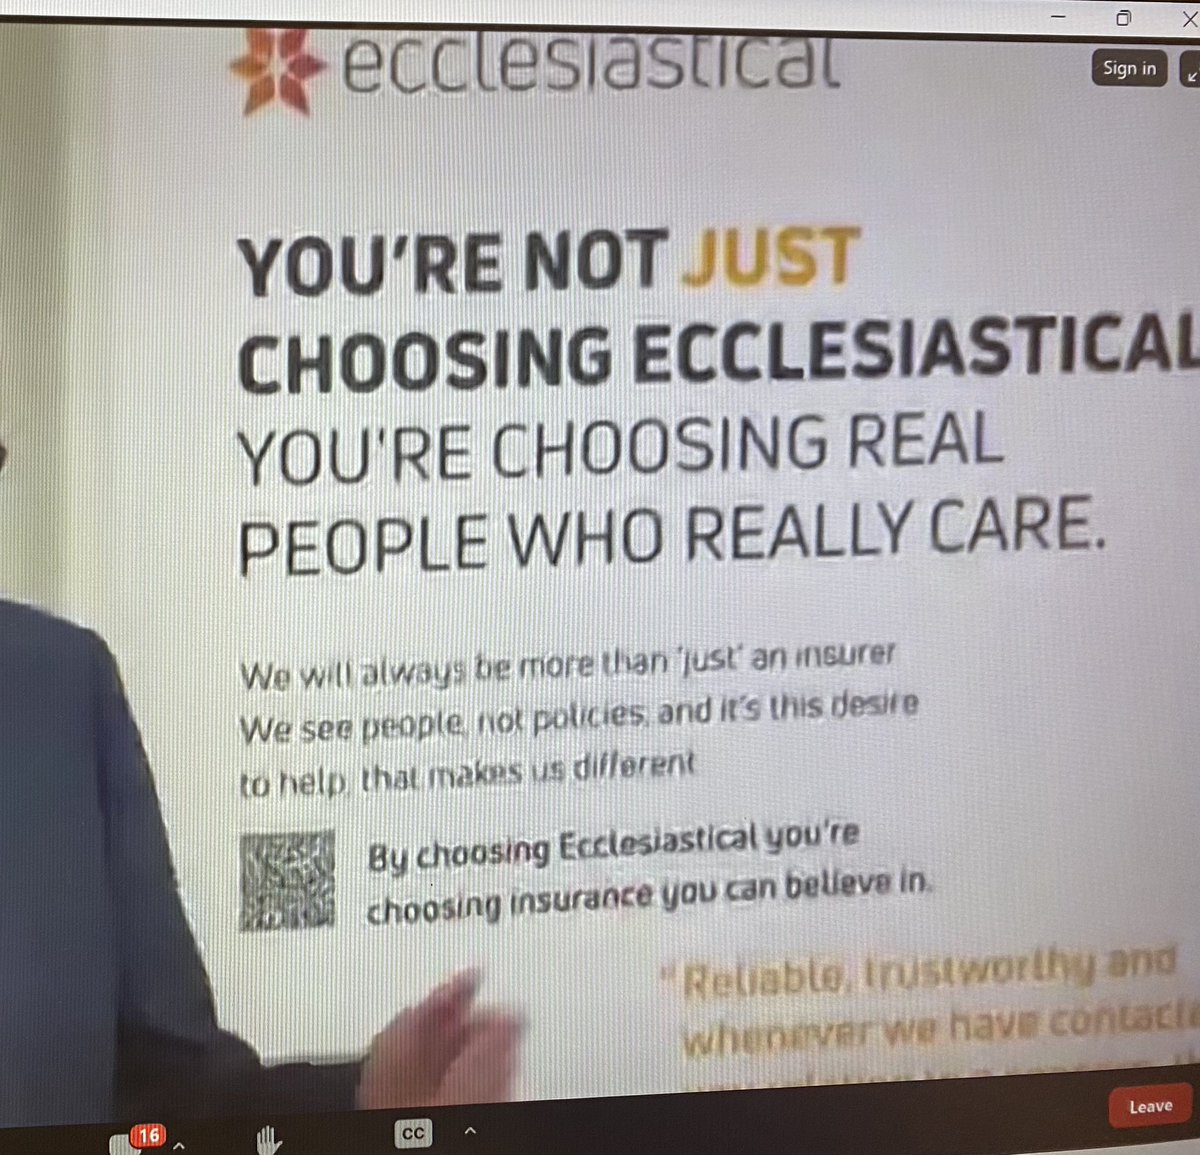 Great to join @Heritage_NGOs conference today virtually, interesting presentations to help me think how all this fits in with my work in supporting churches. As proud sponsors of the conference the @Ecclesiastical banner sums up my overarching approach to this work